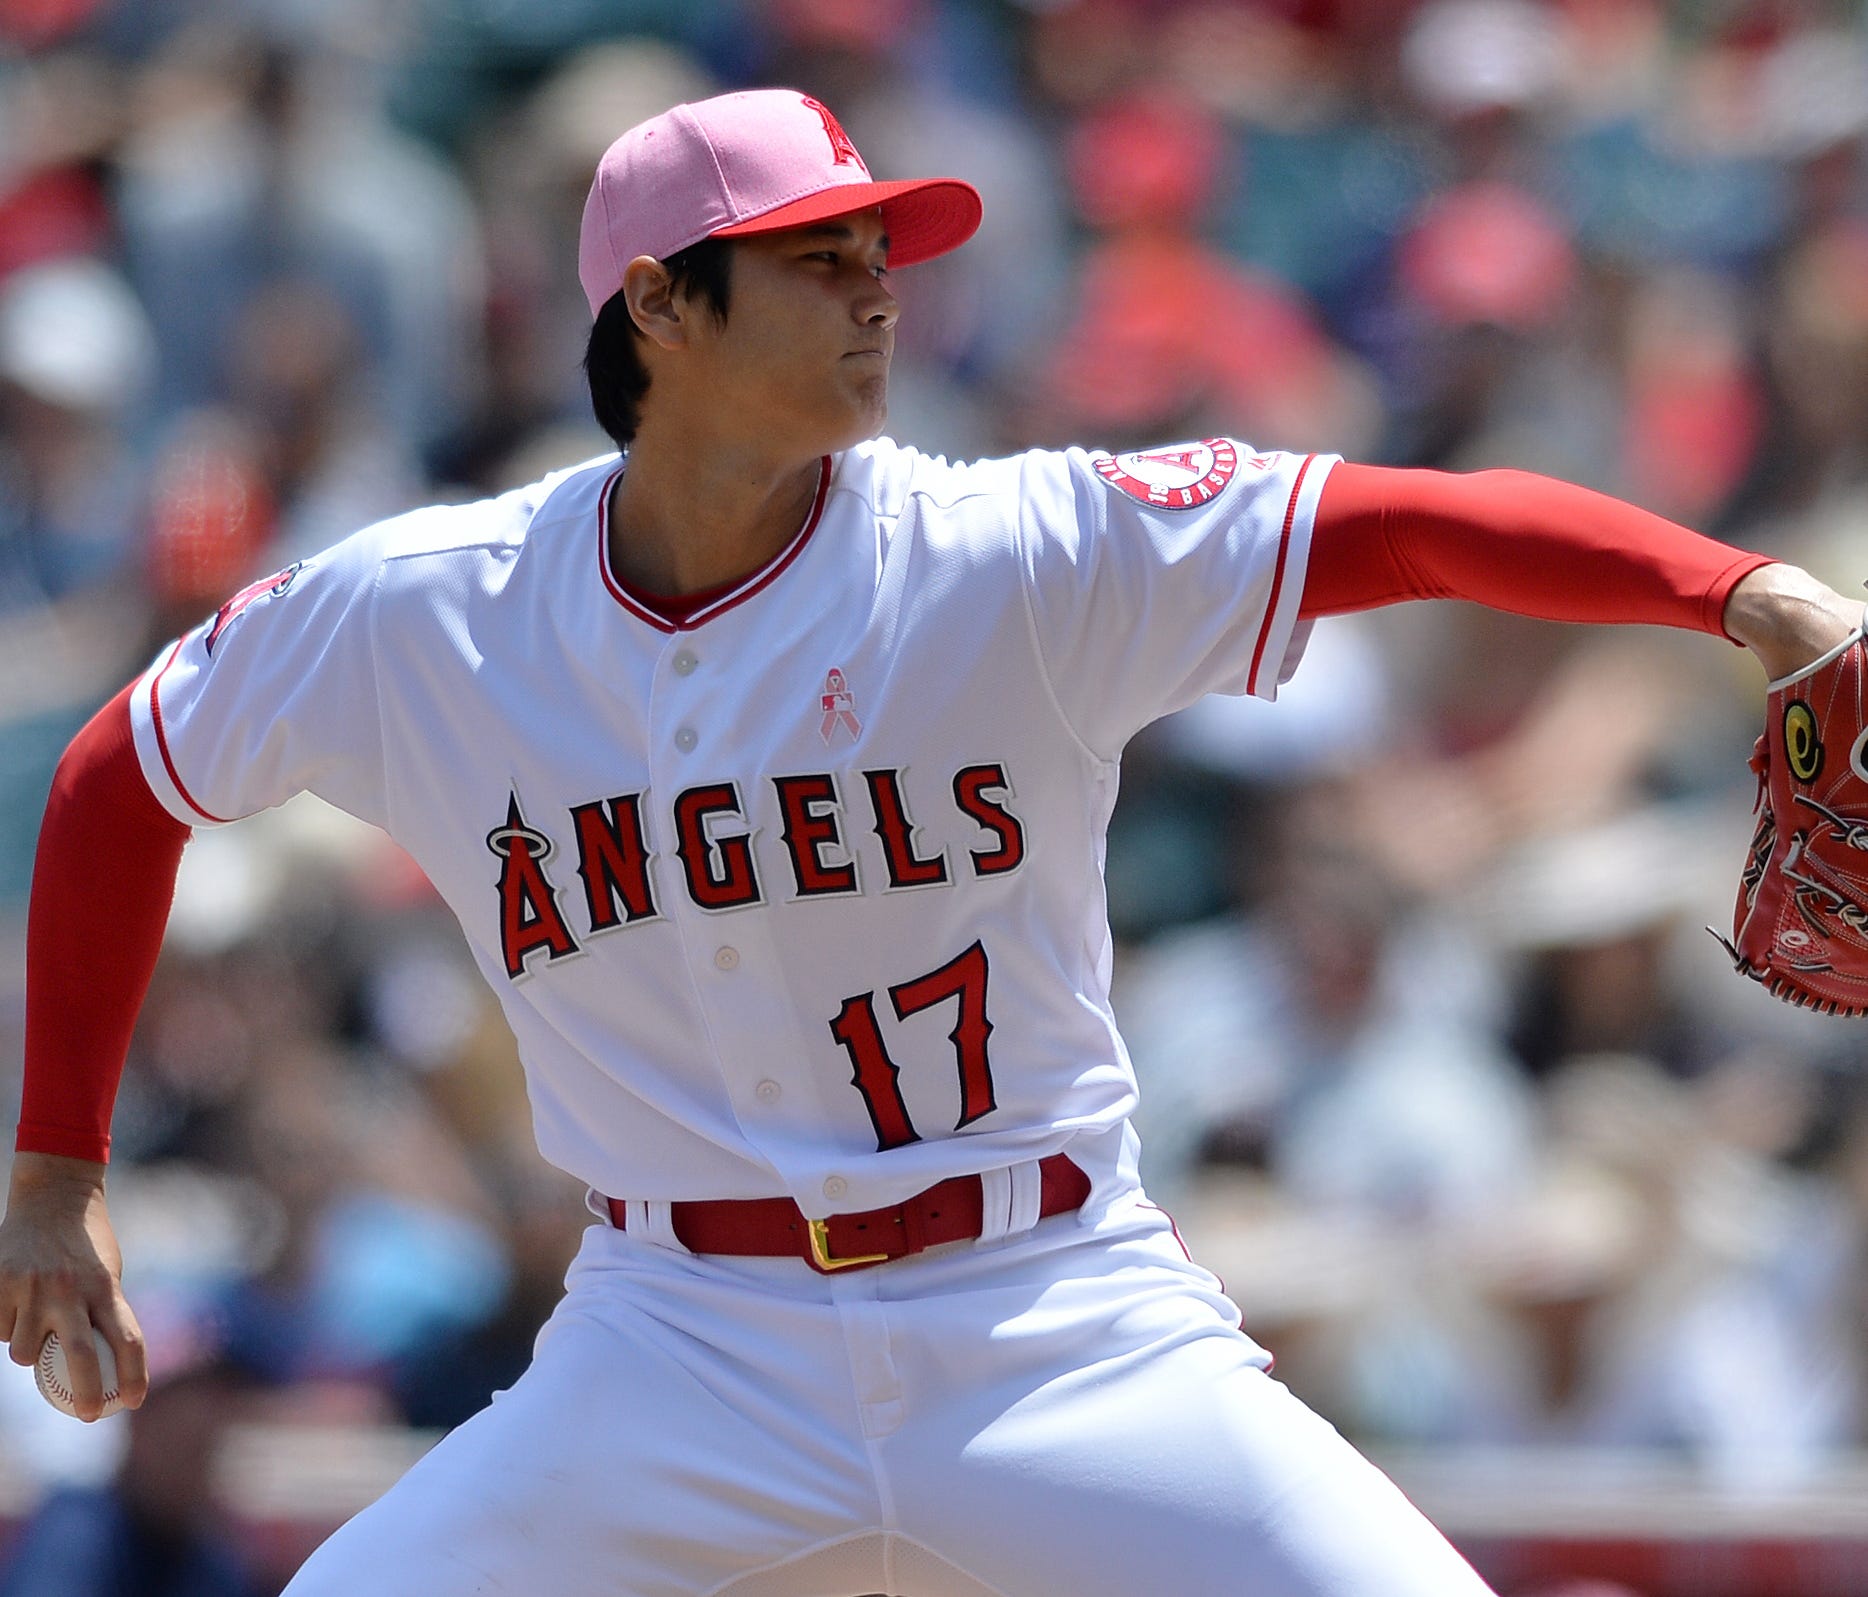 Angels pitcher Shohei Ohtani struck out 11 Twins in pitching 6 1/3 shutout innings on Sunday.